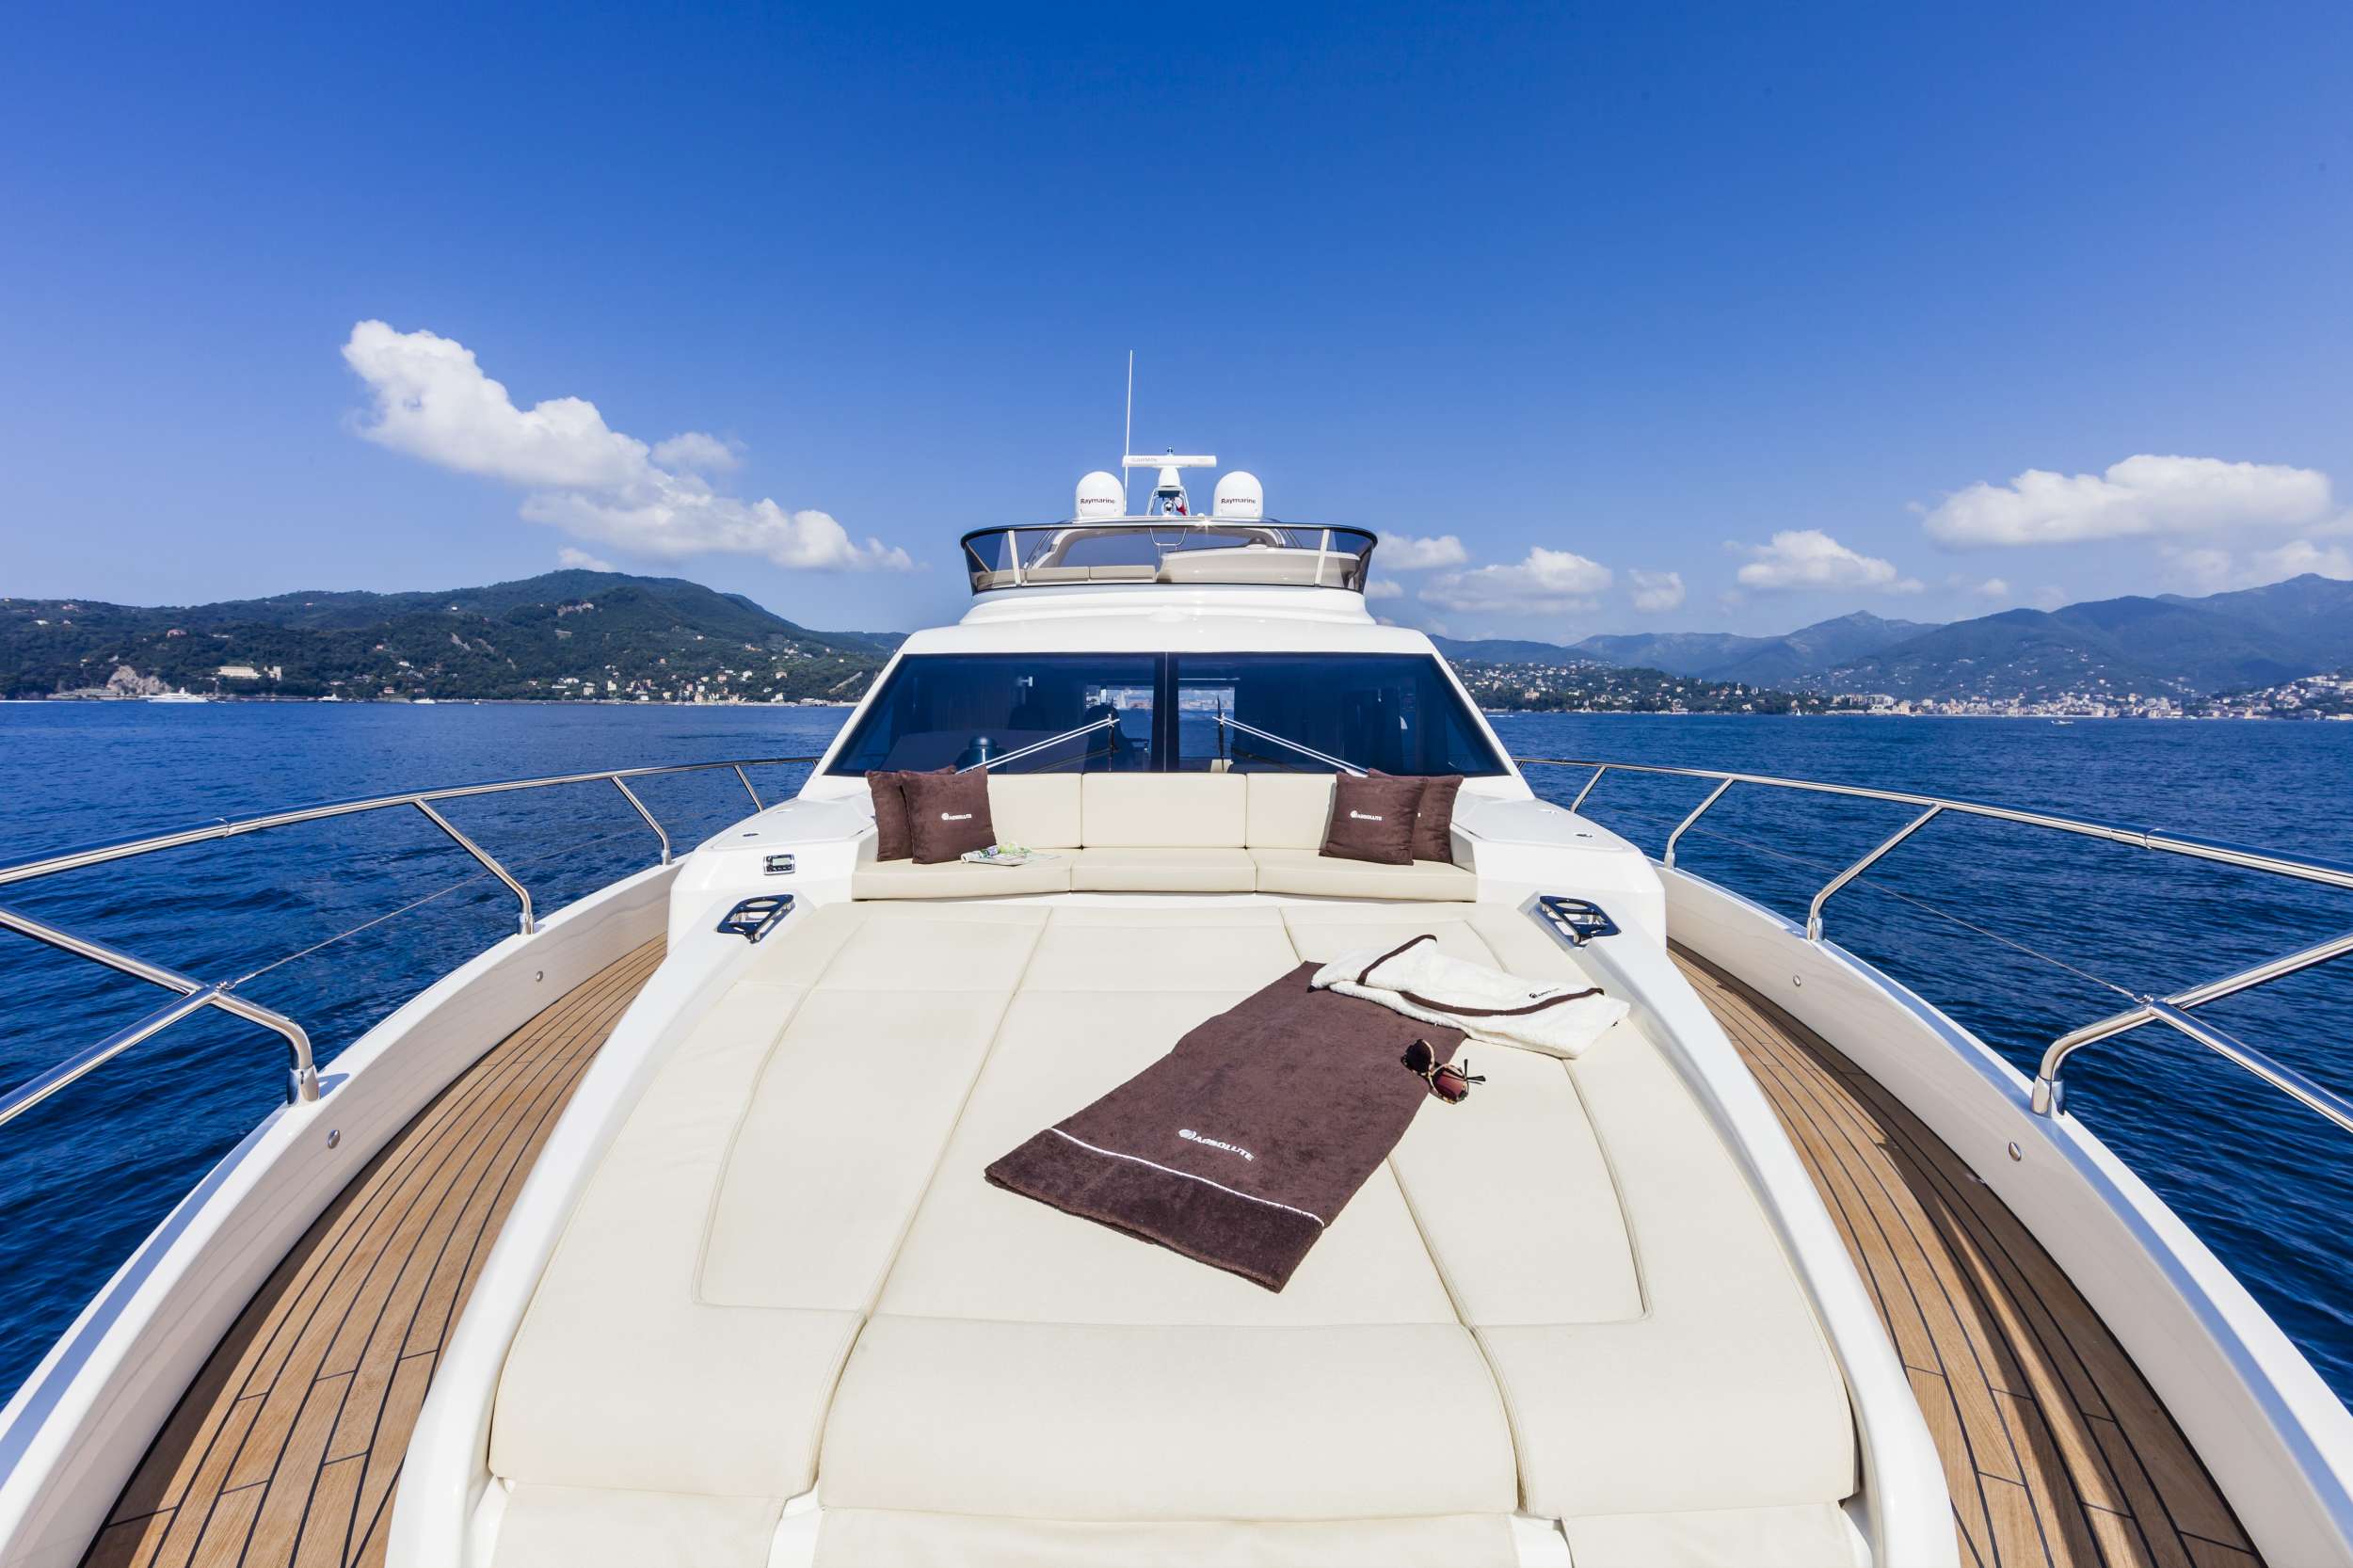 ABSOLUTE - Yacht Charter Cogolin & Boat hire in Fr. Riviera, Corsica & Sardinia 4